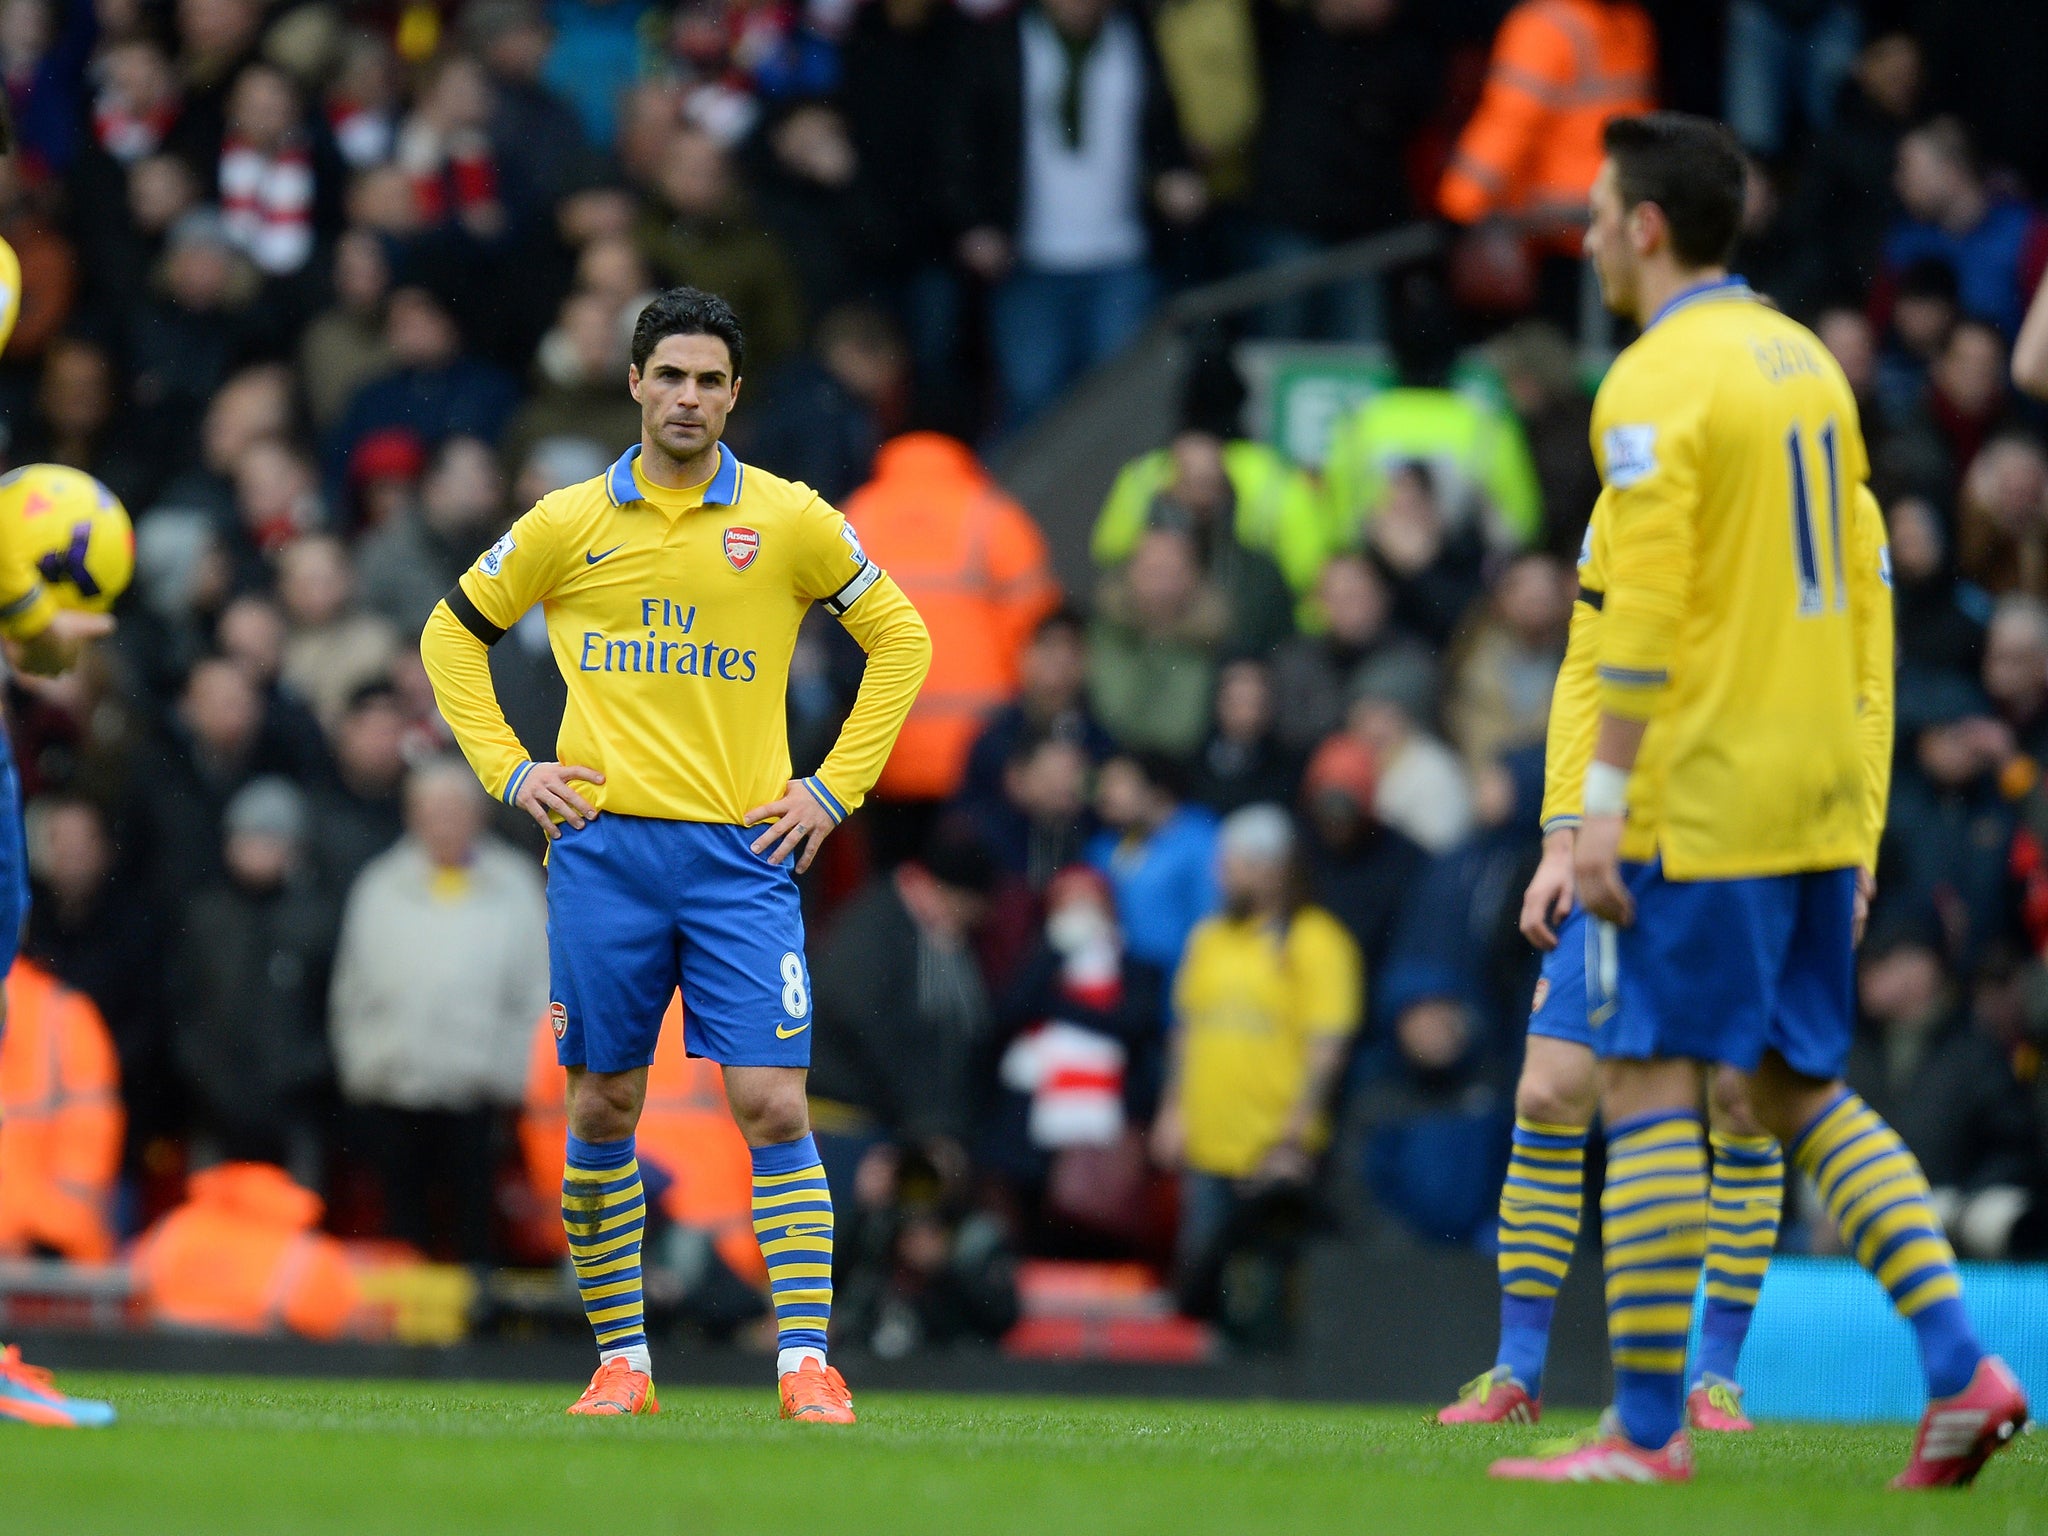 MIKEL ARTETA: Forced to play too deeply to have a major influence but took penalty coolly - 6.